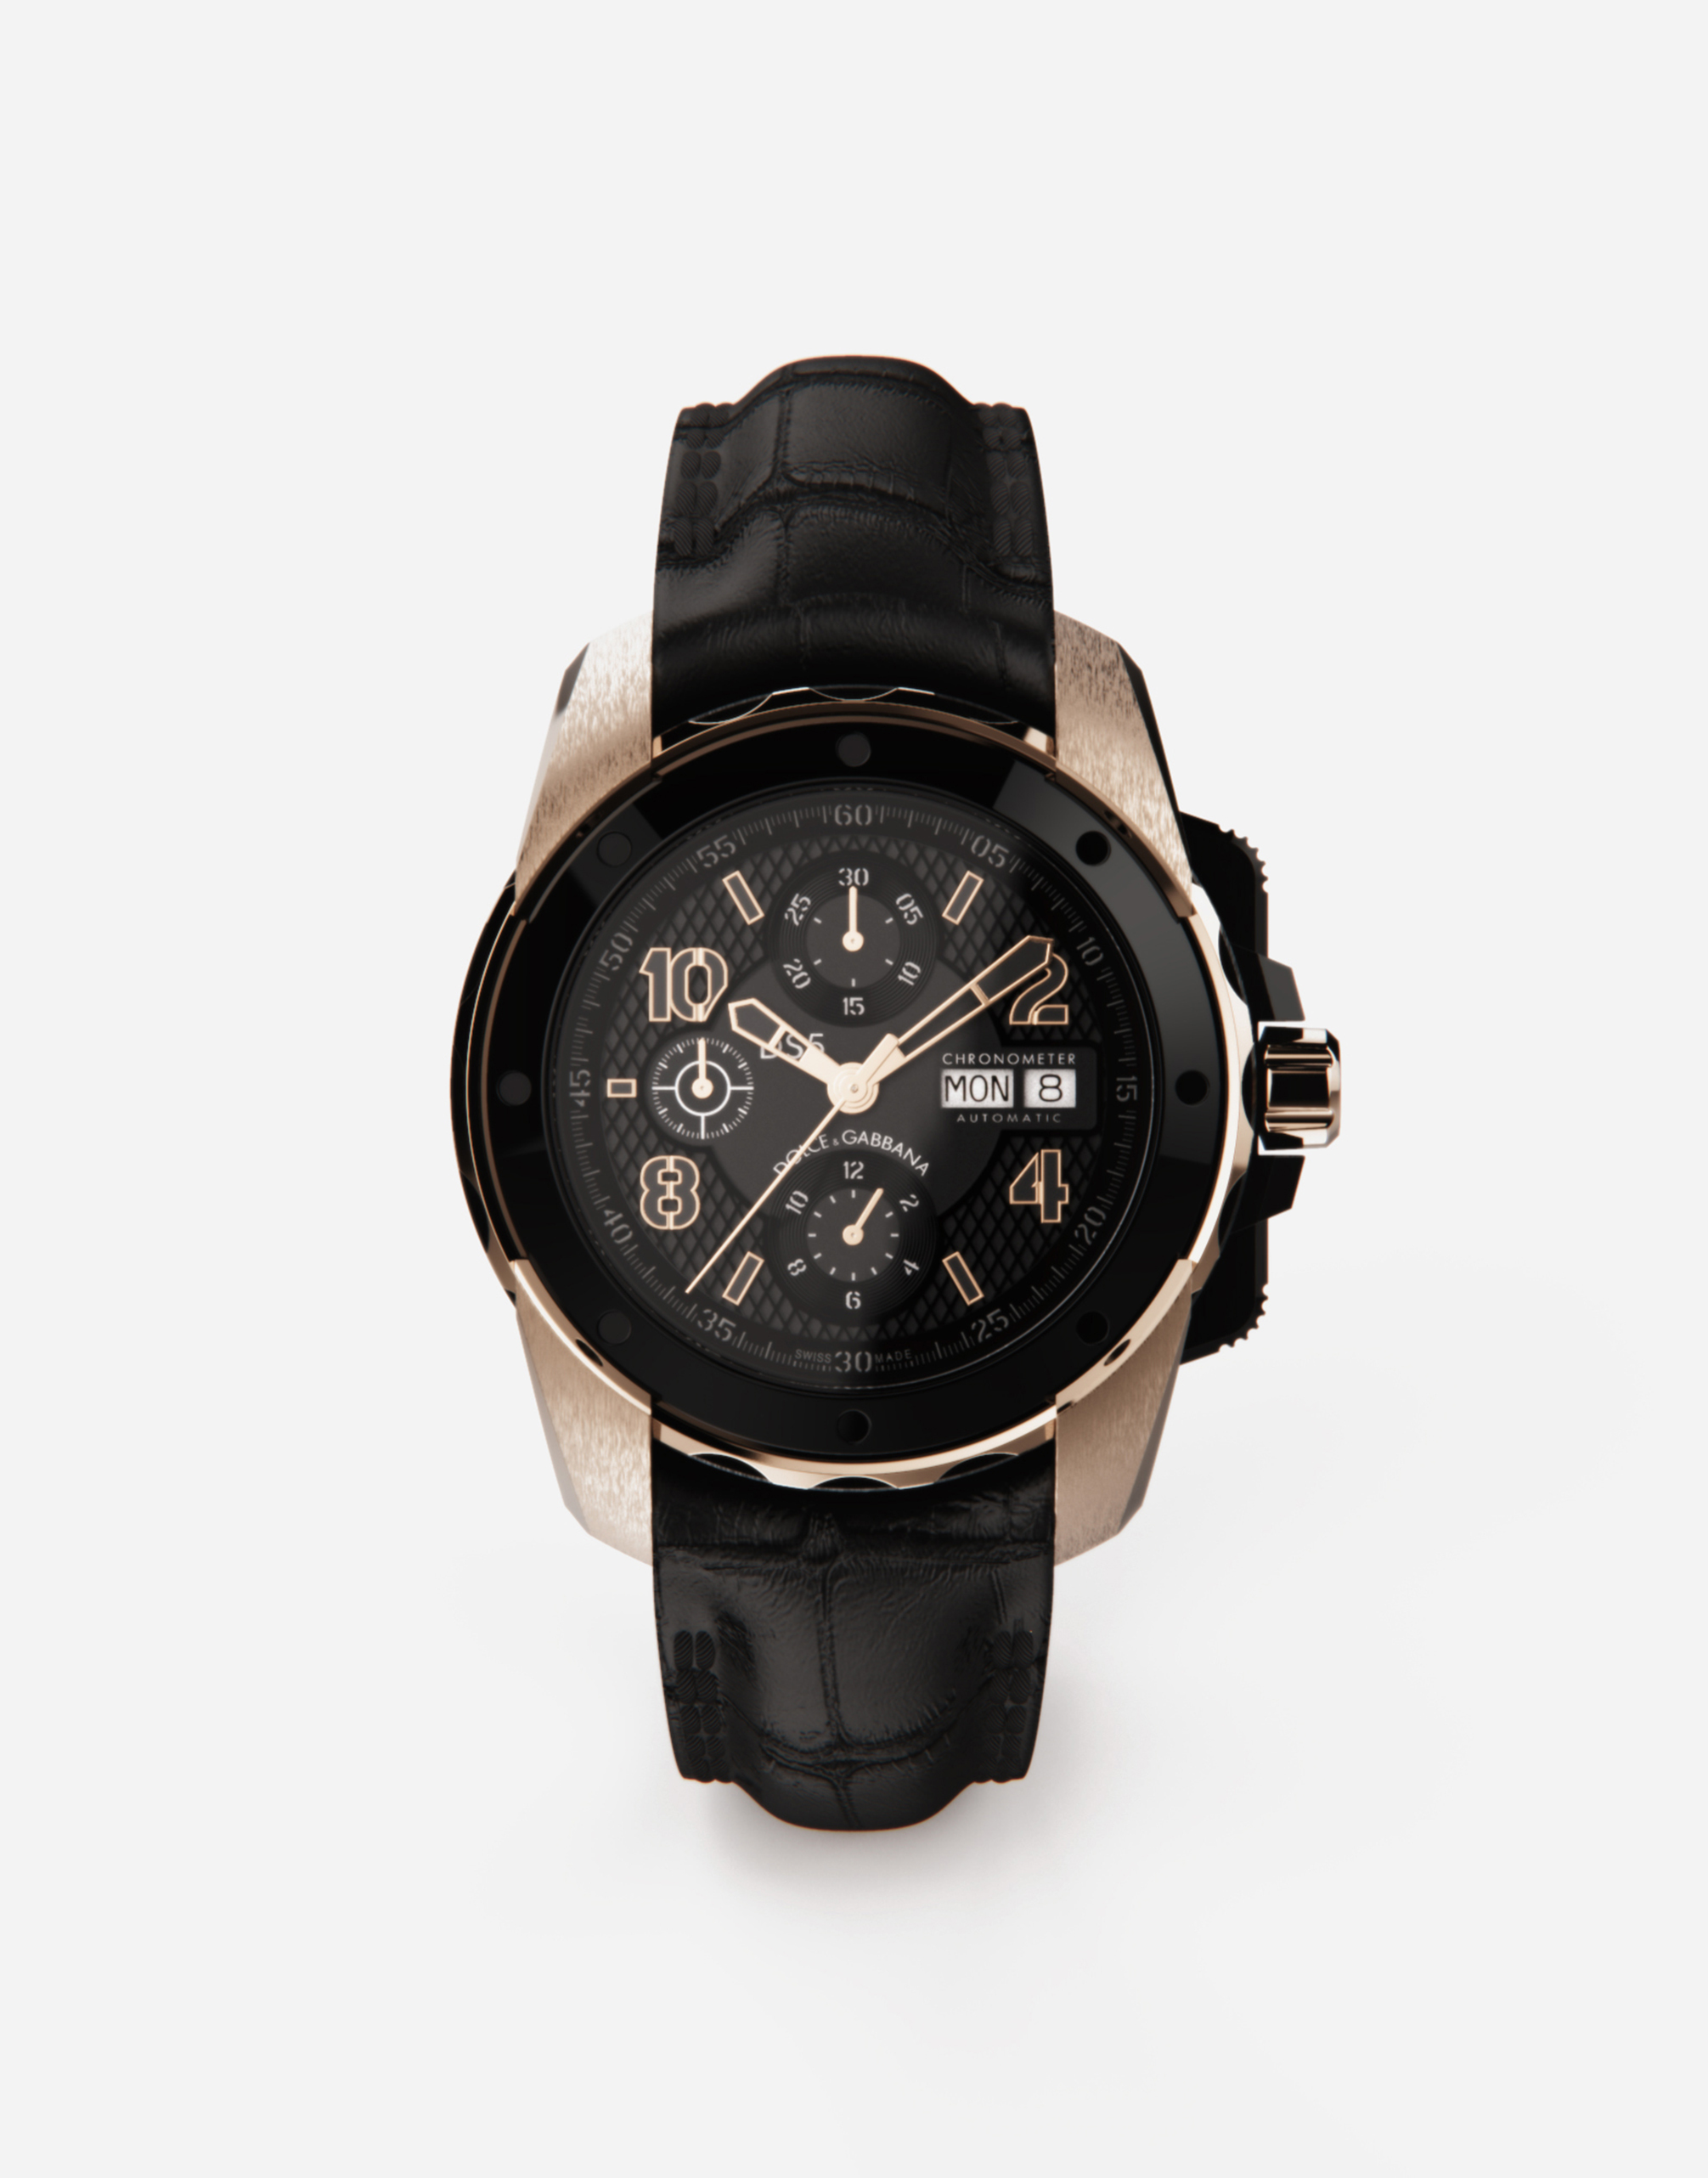 DS5 watch in red gold and steel with pvd coating in Black